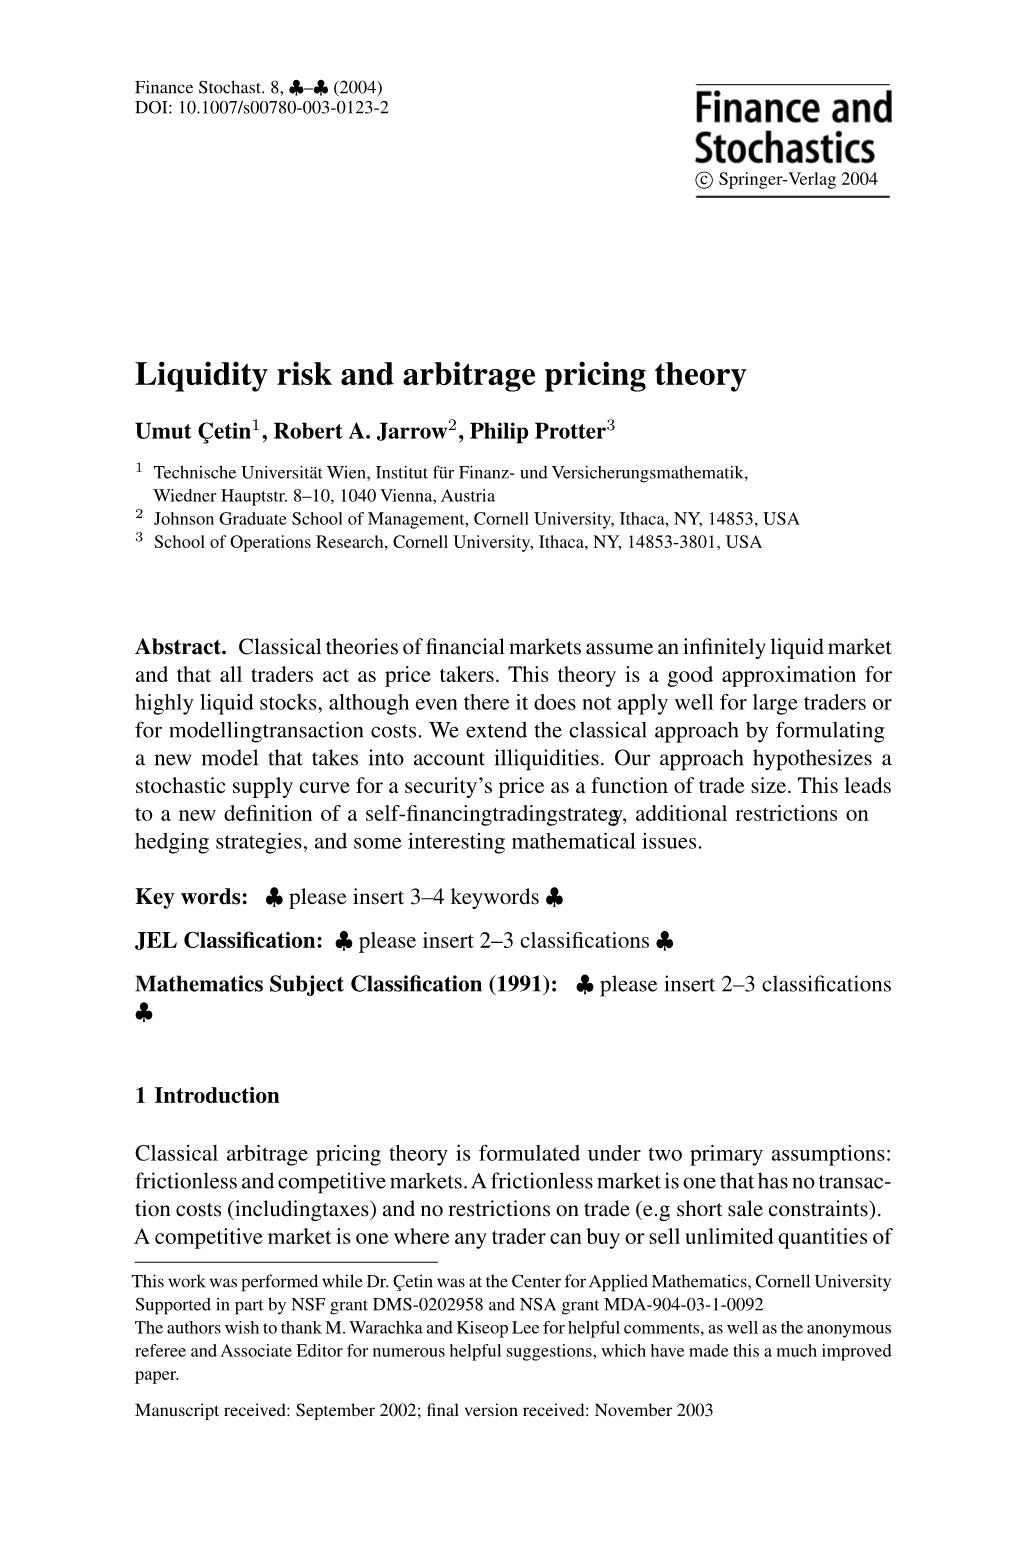 Liquidity Risk and Arbitrage Pricing Theory